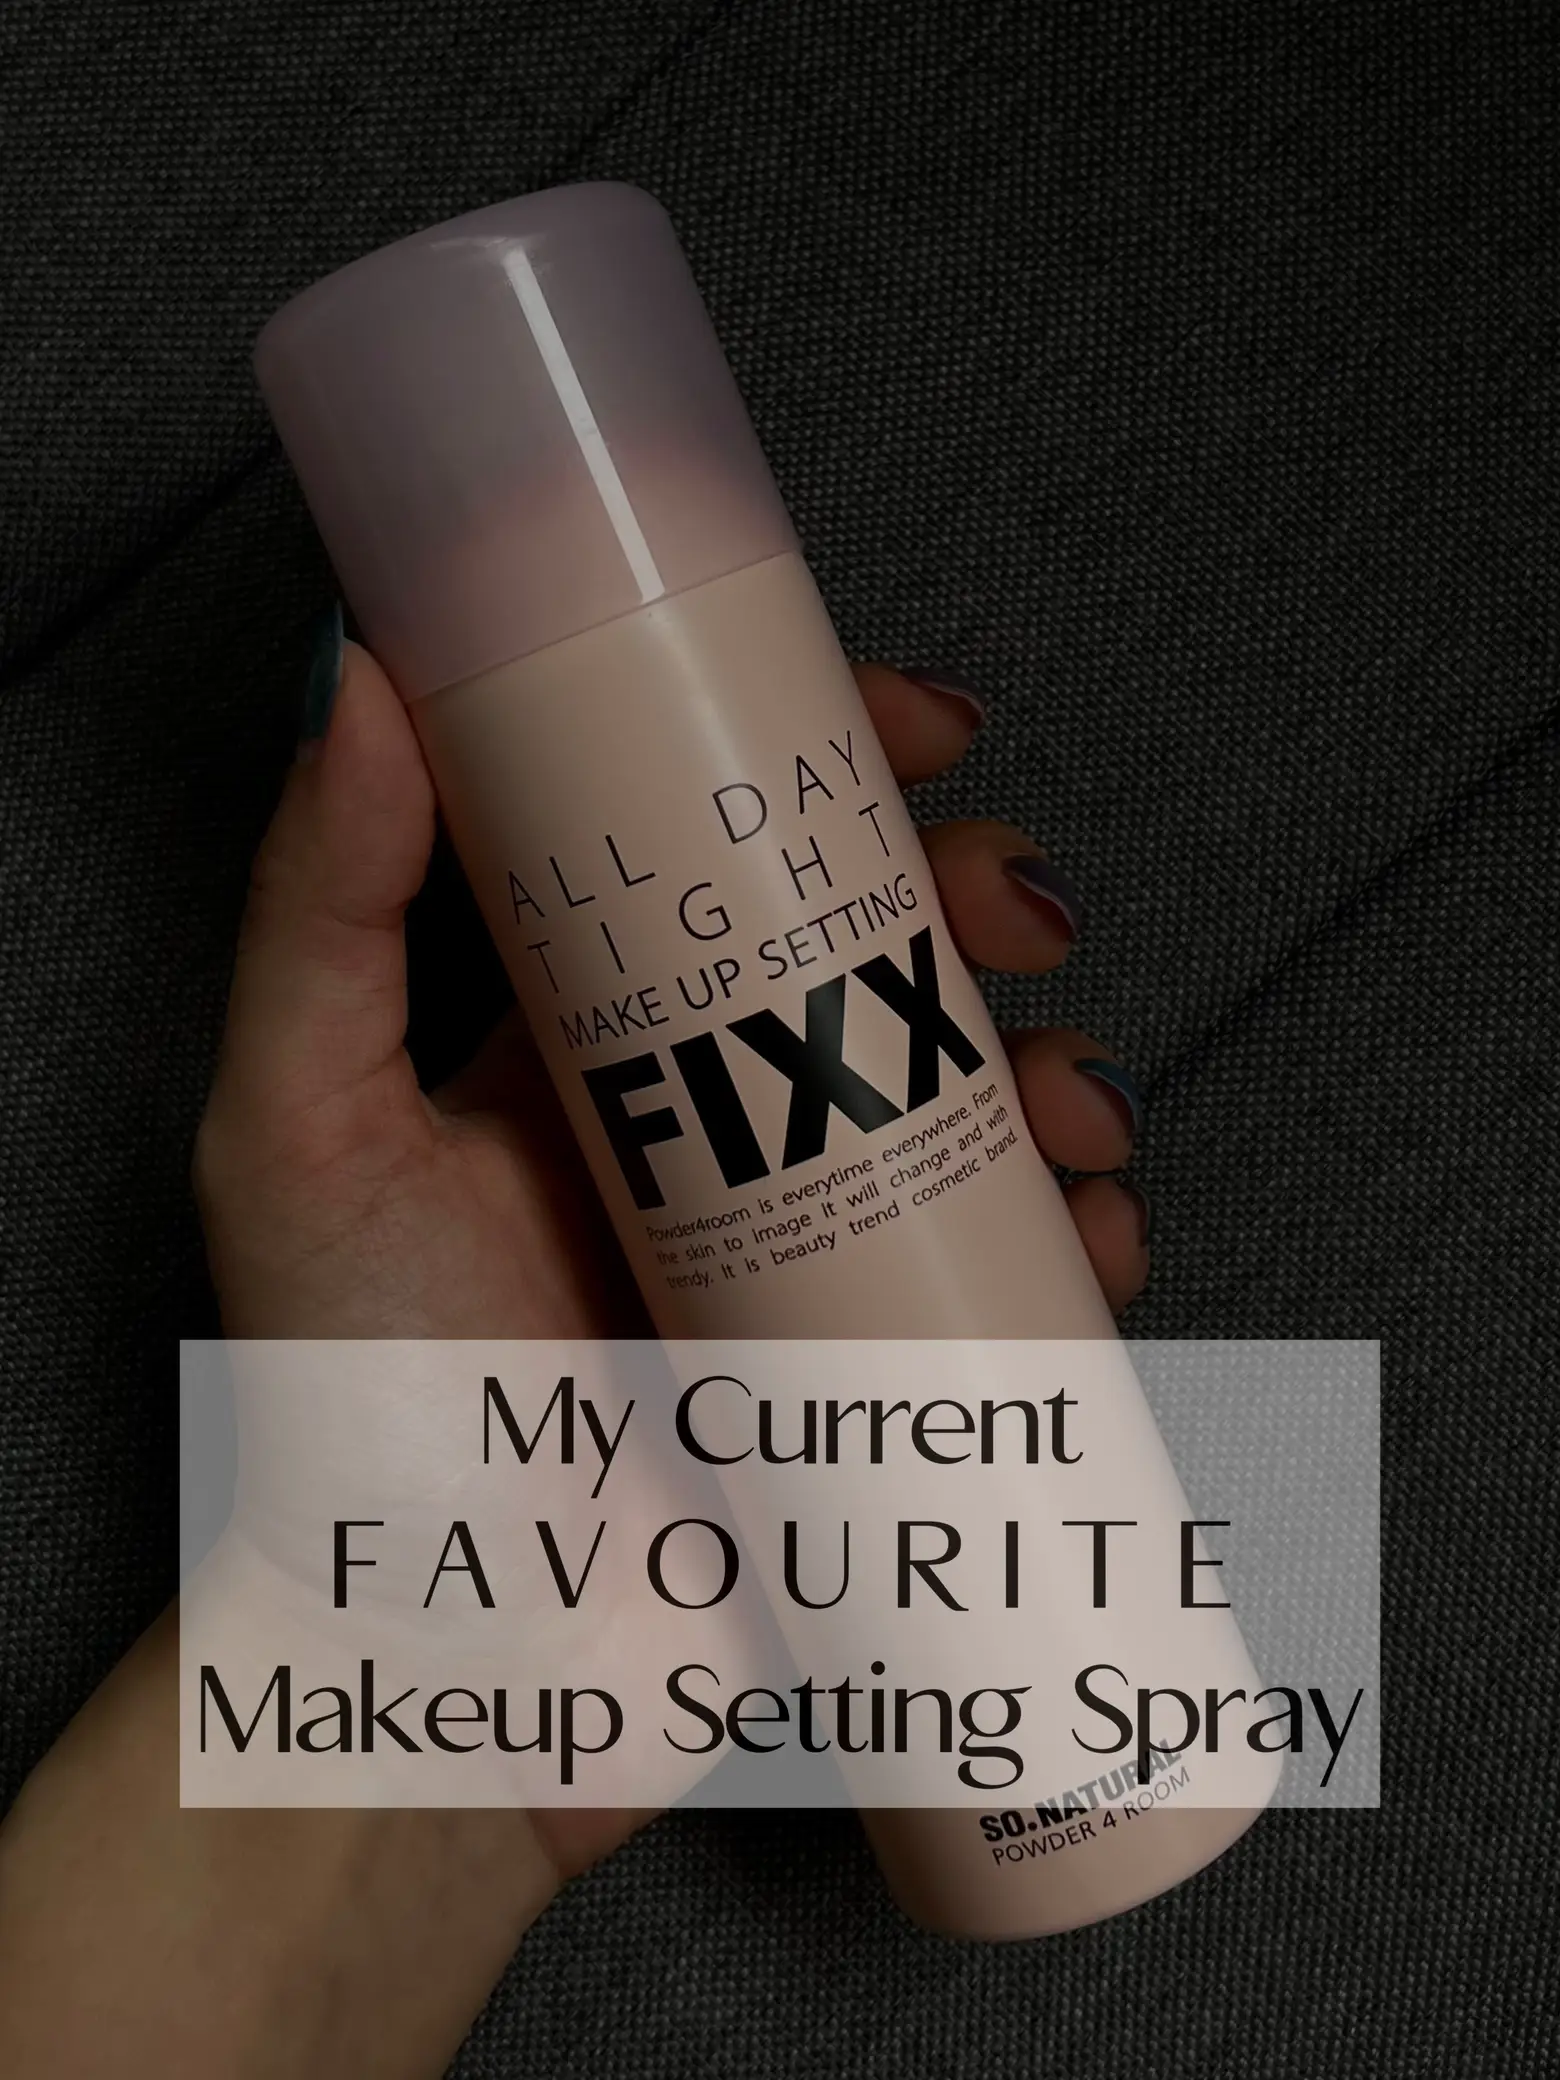 Found The Best Make Up Setting Spray